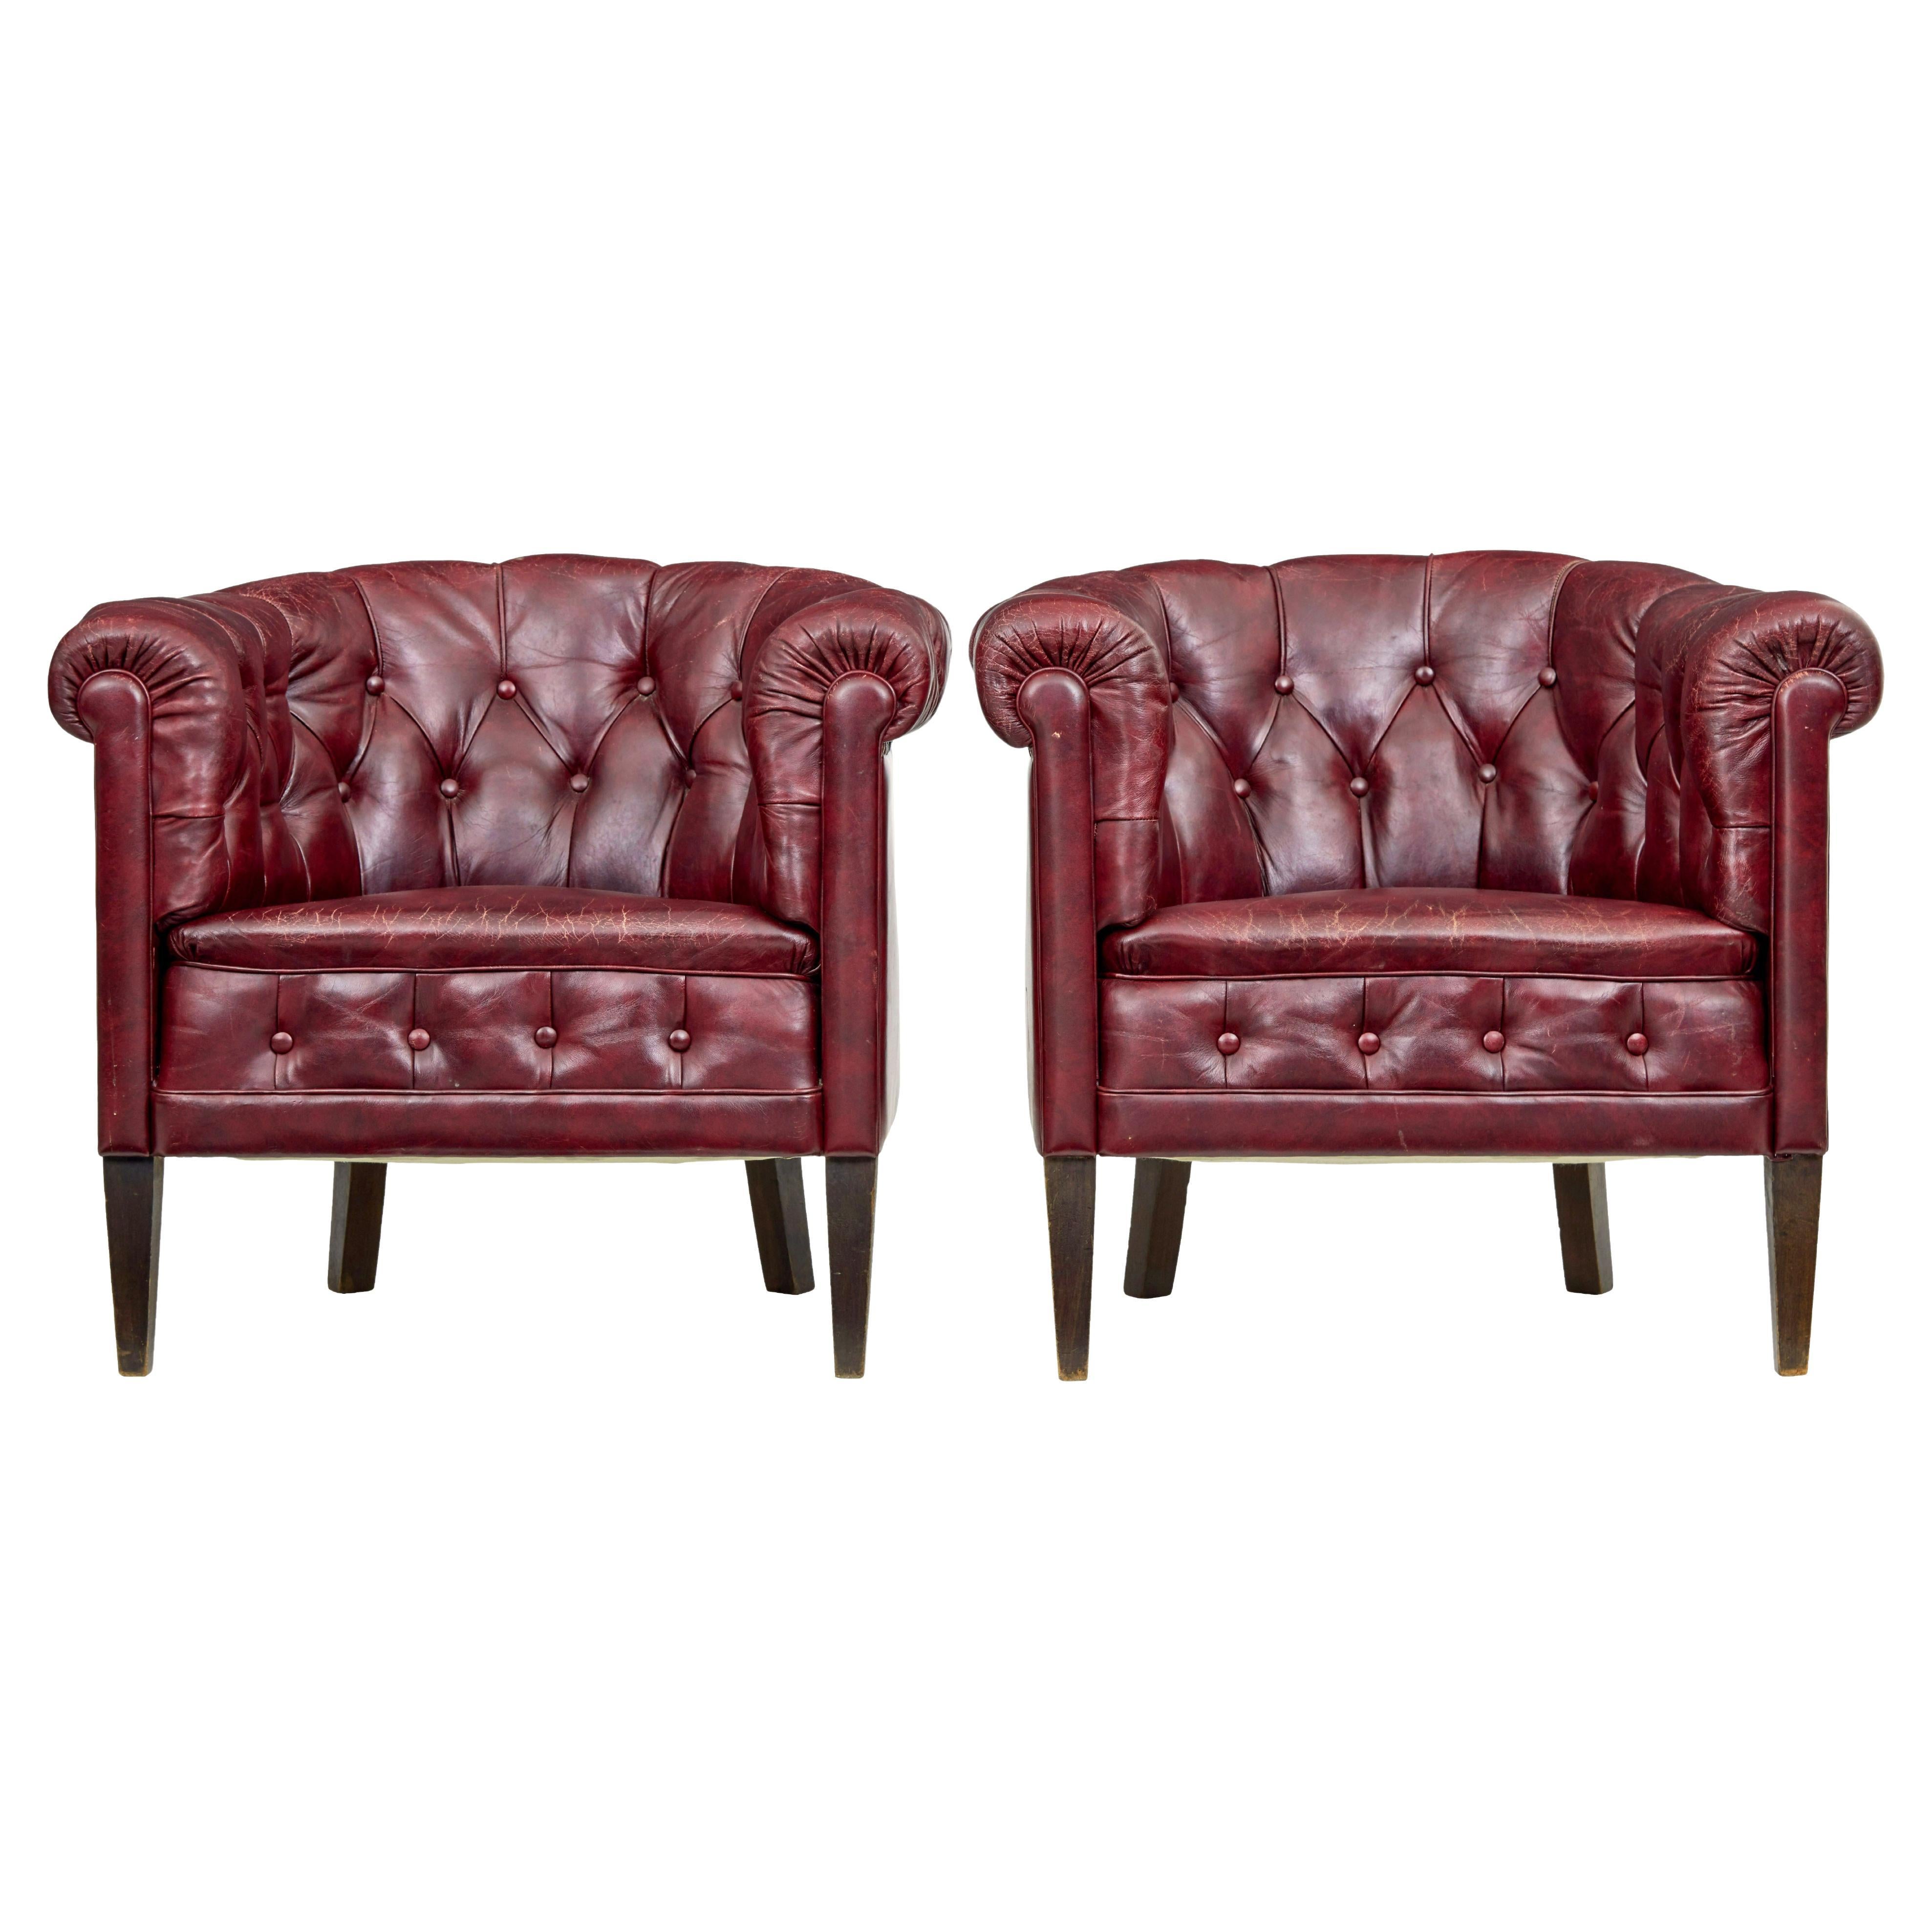 Pair of mid 20th century red leather club armchairs For Sale